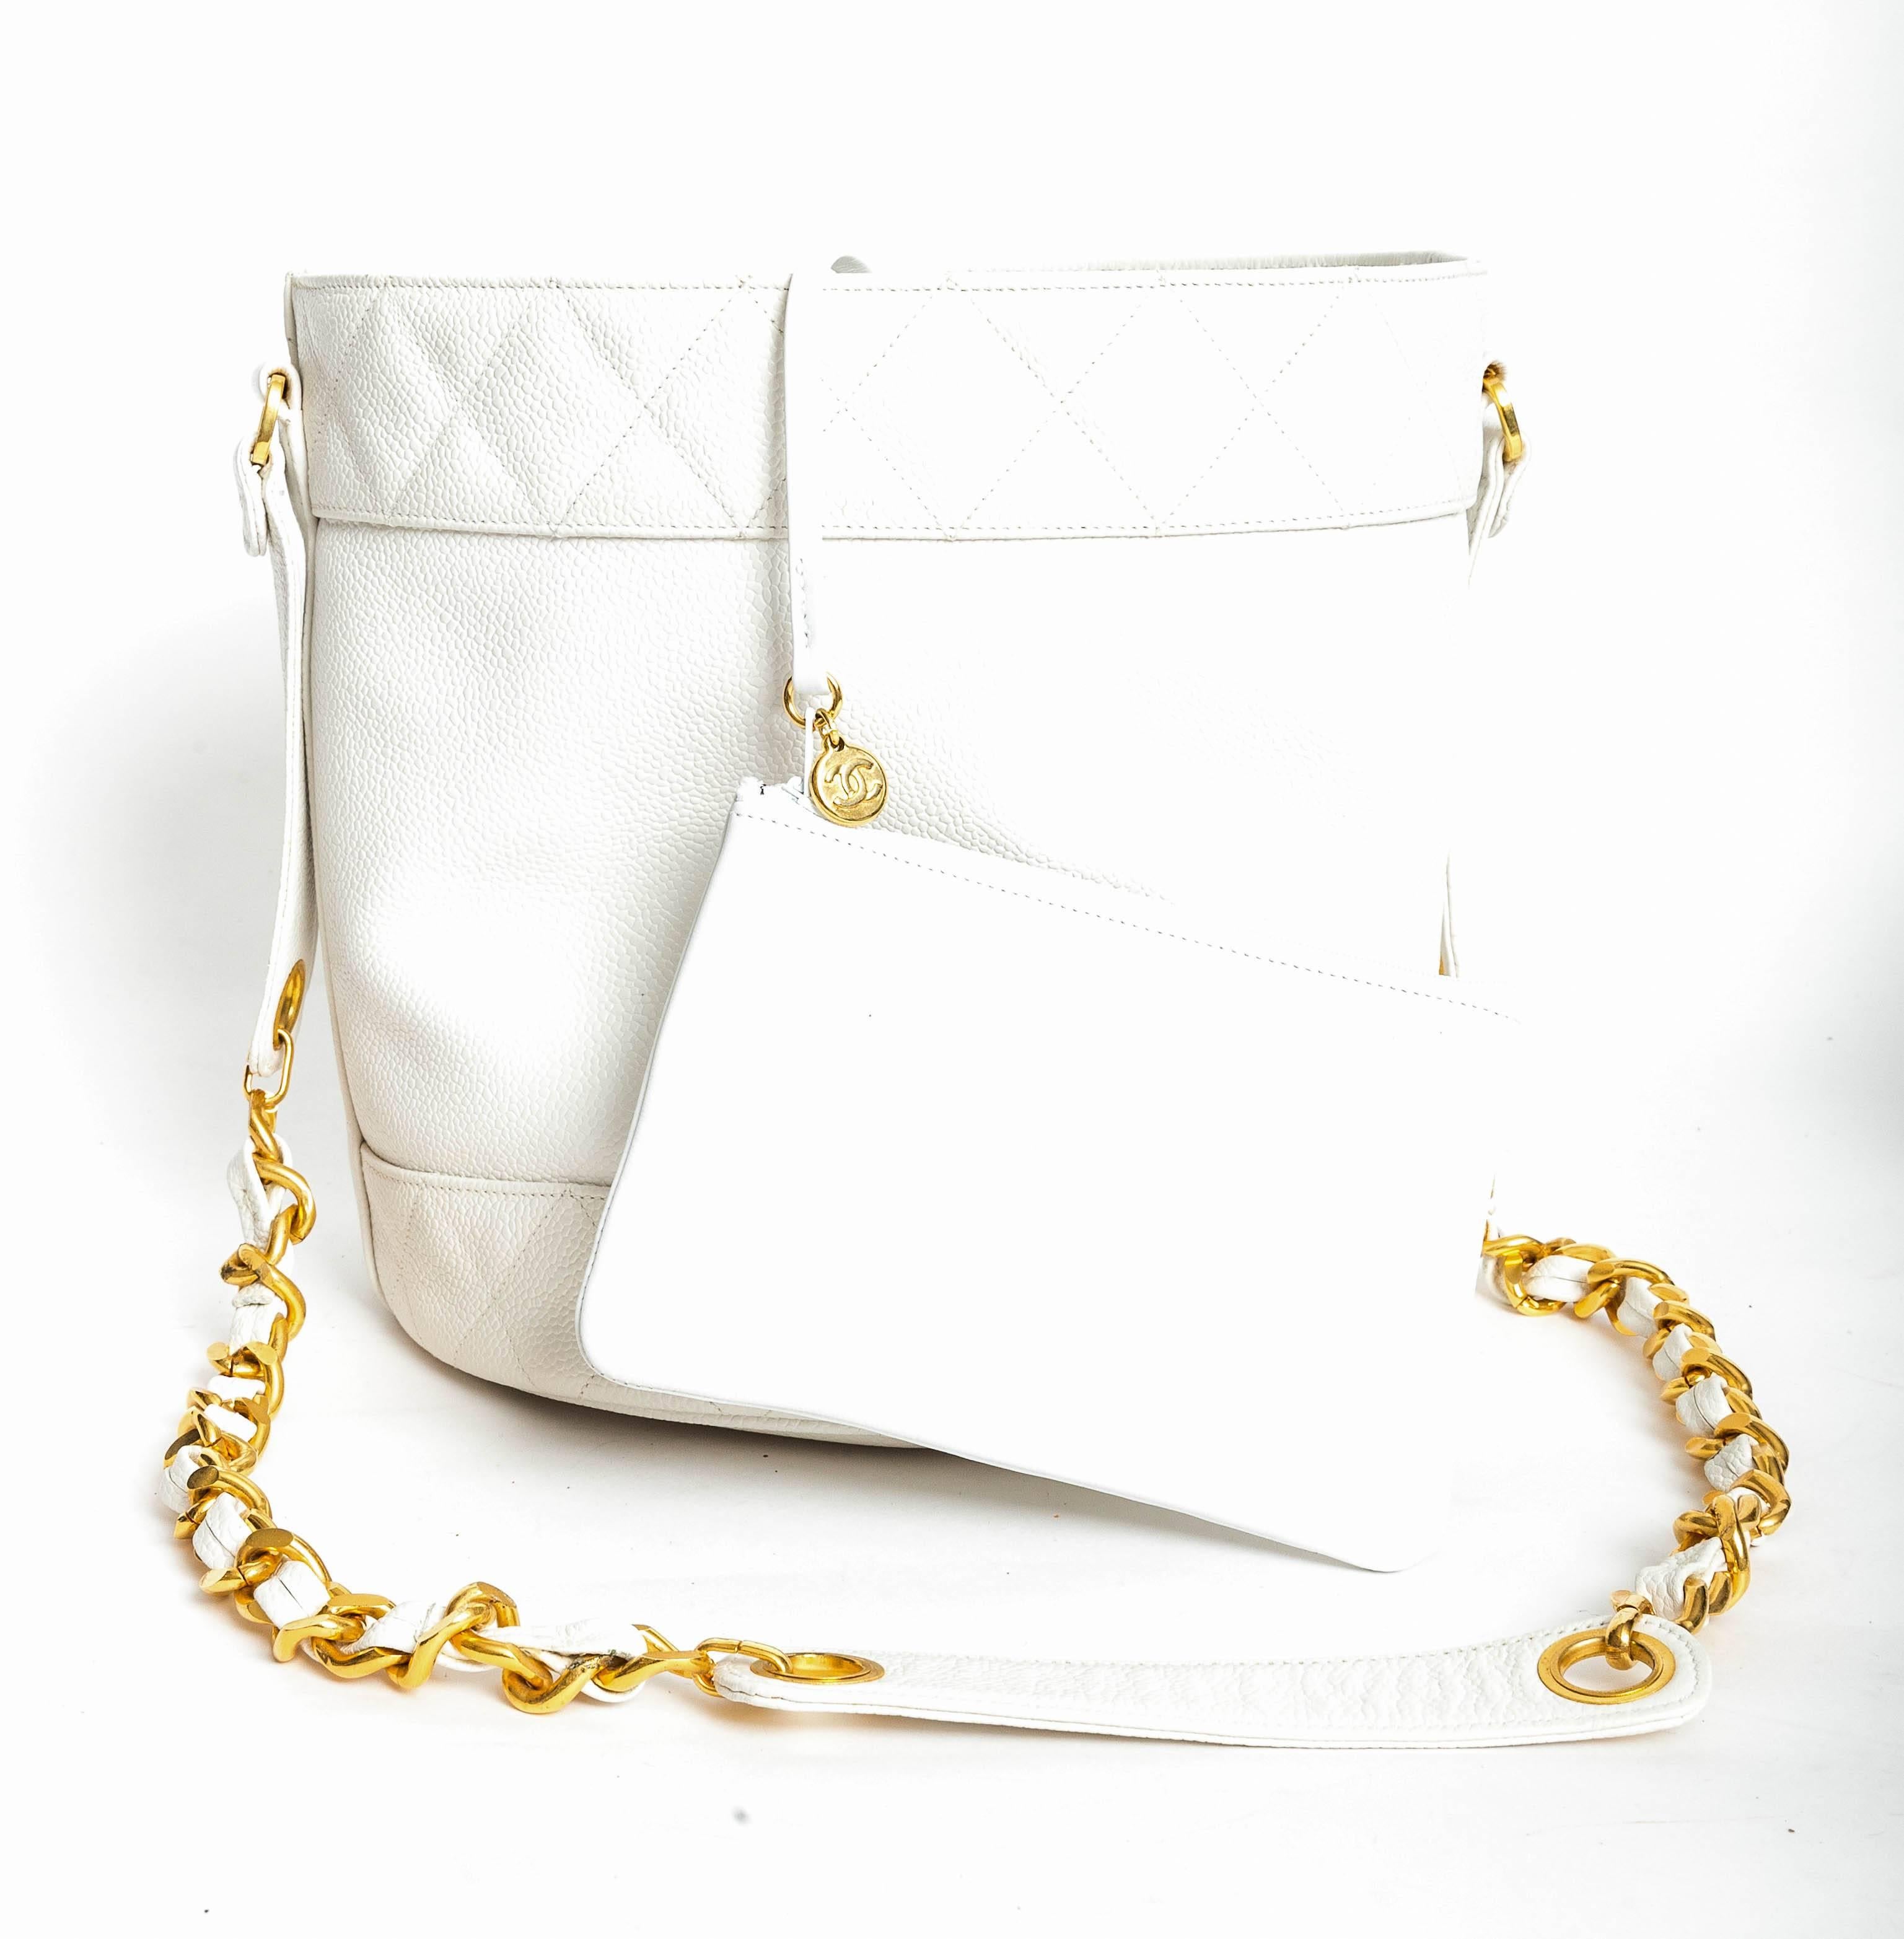 Chanel White Caviar Drawstring Bucket Bag with Interior Pouch and Gold Hardware  4